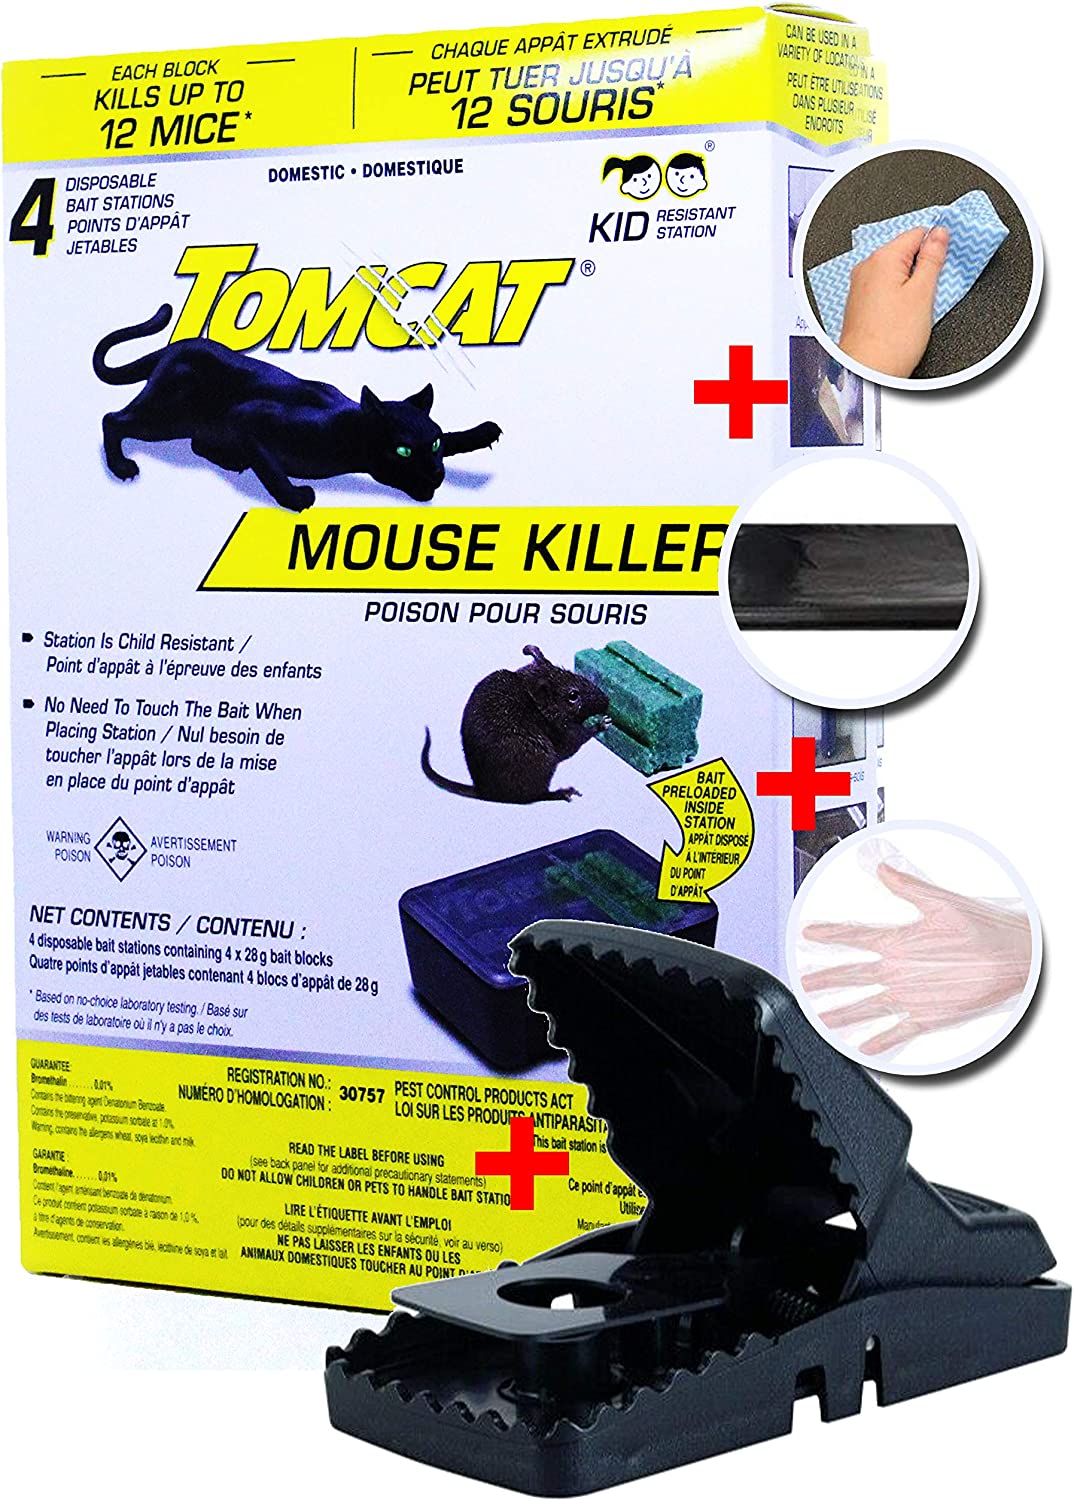 Certified Mouse Rodent Rat Poison Trap Killer-Child and Dog Resistant-Disposable 4 Pack Bait Chunks Stations with Large Heavy-Duty Reusable Rat Snap Trap Complete Pack for Rodent Free Home